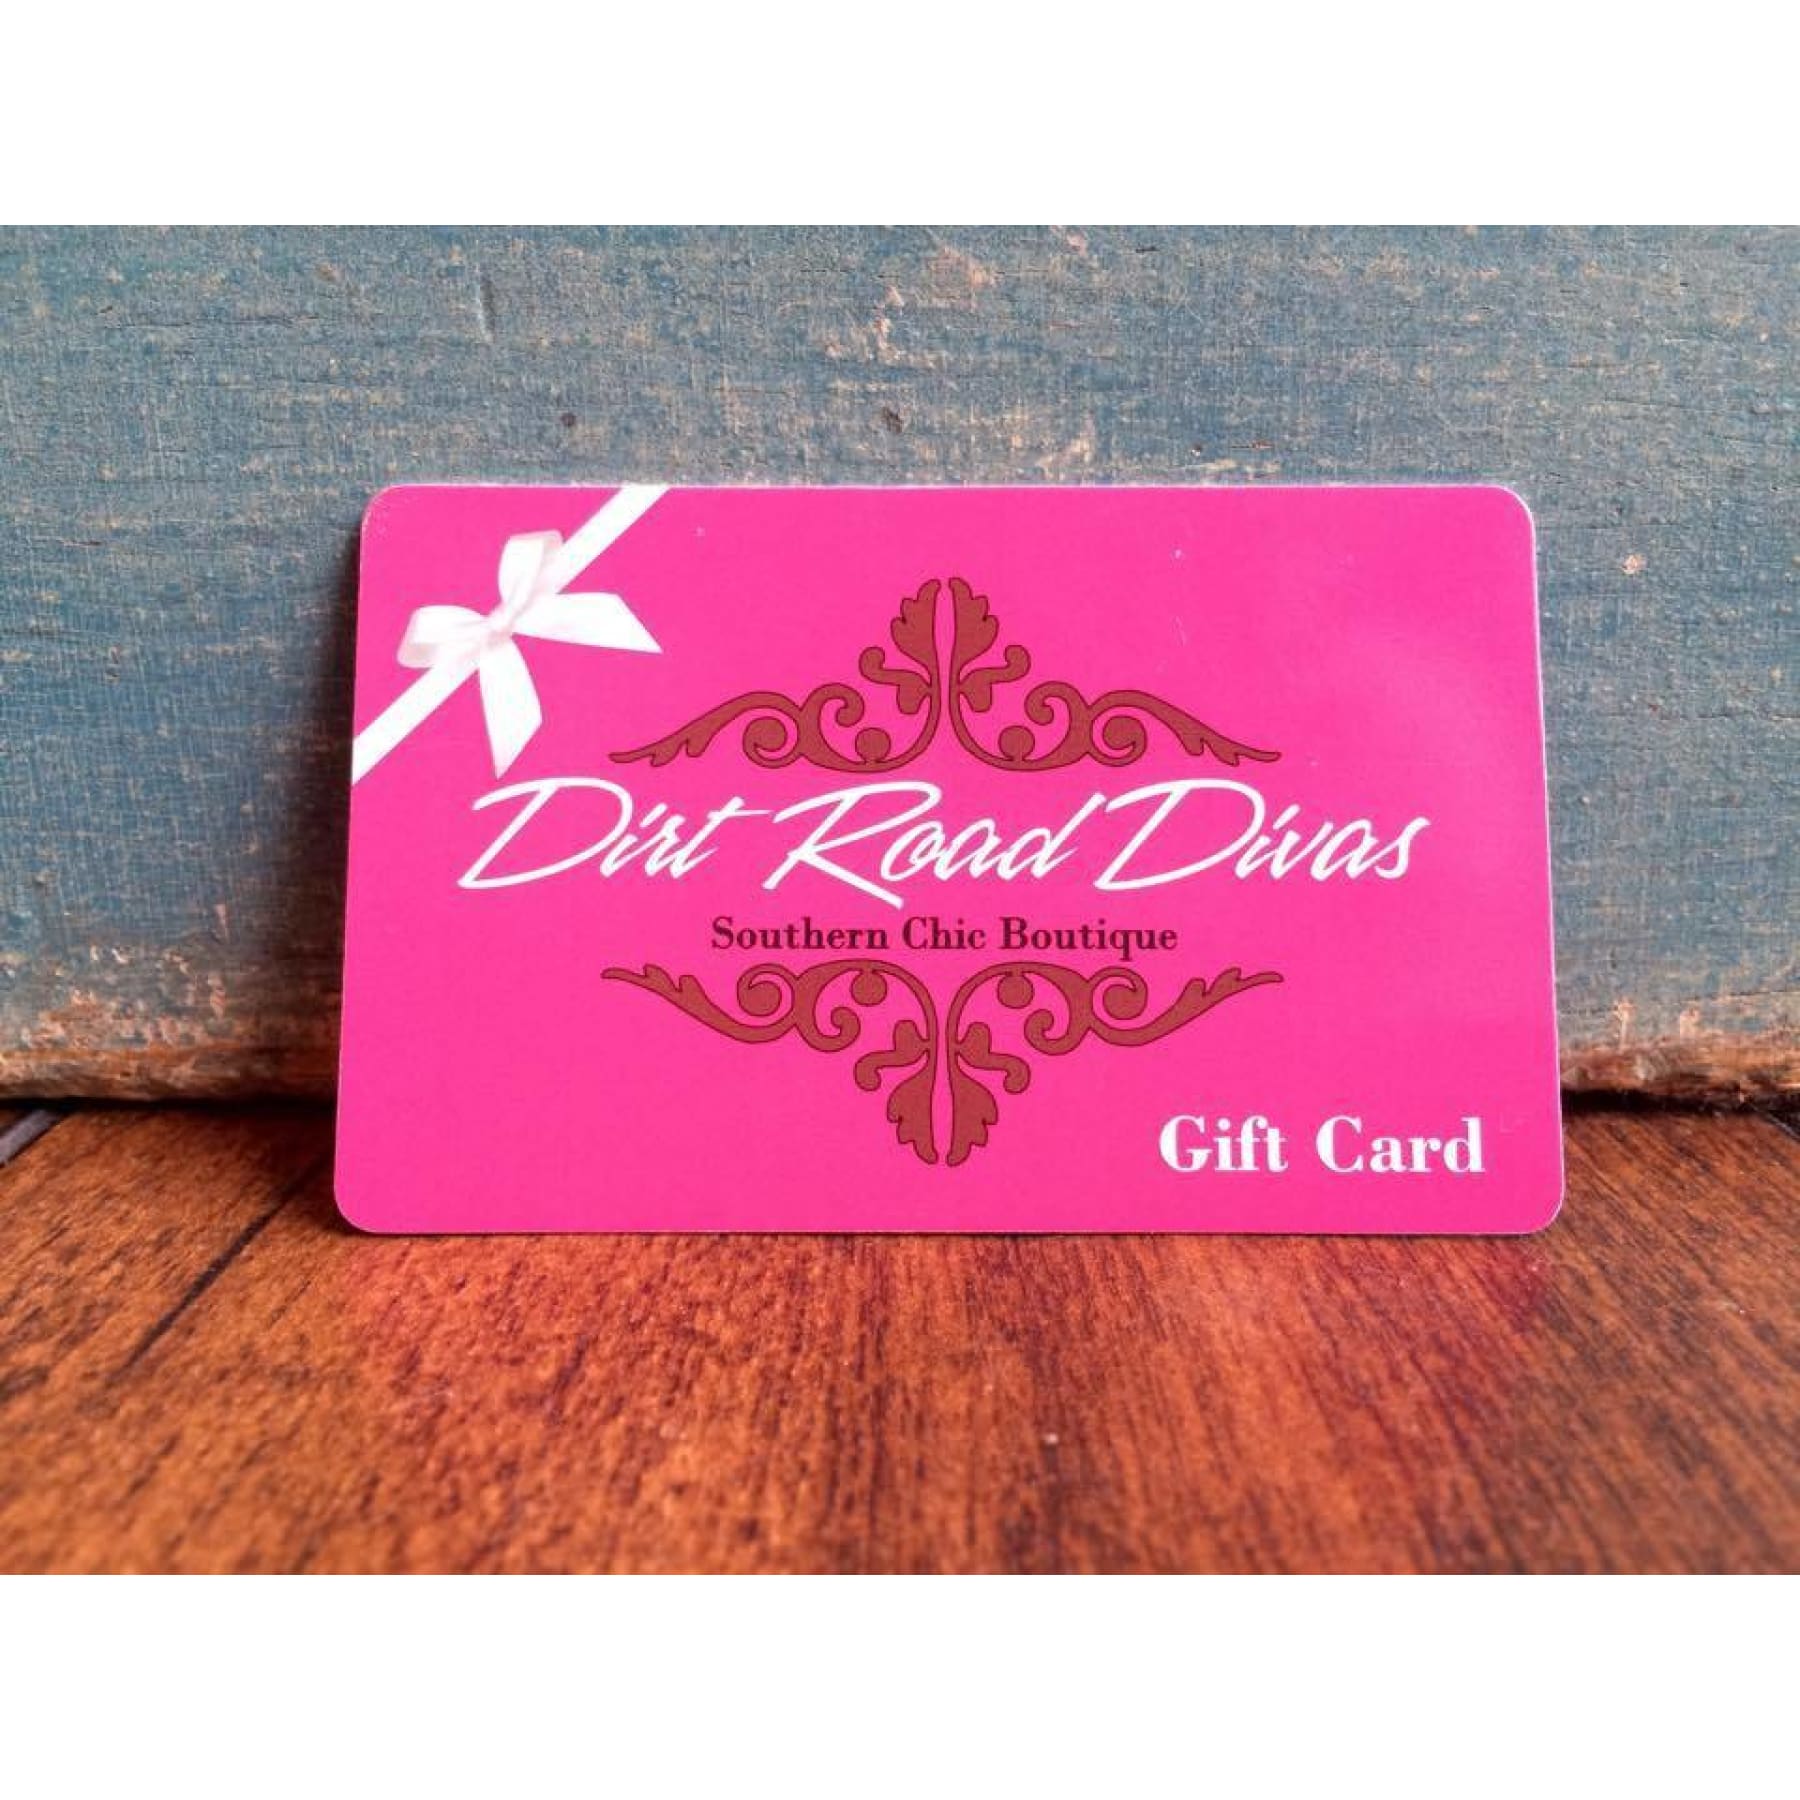 DRD Gift Card $50.00,Gifts - Dirt Road Divas Boutique